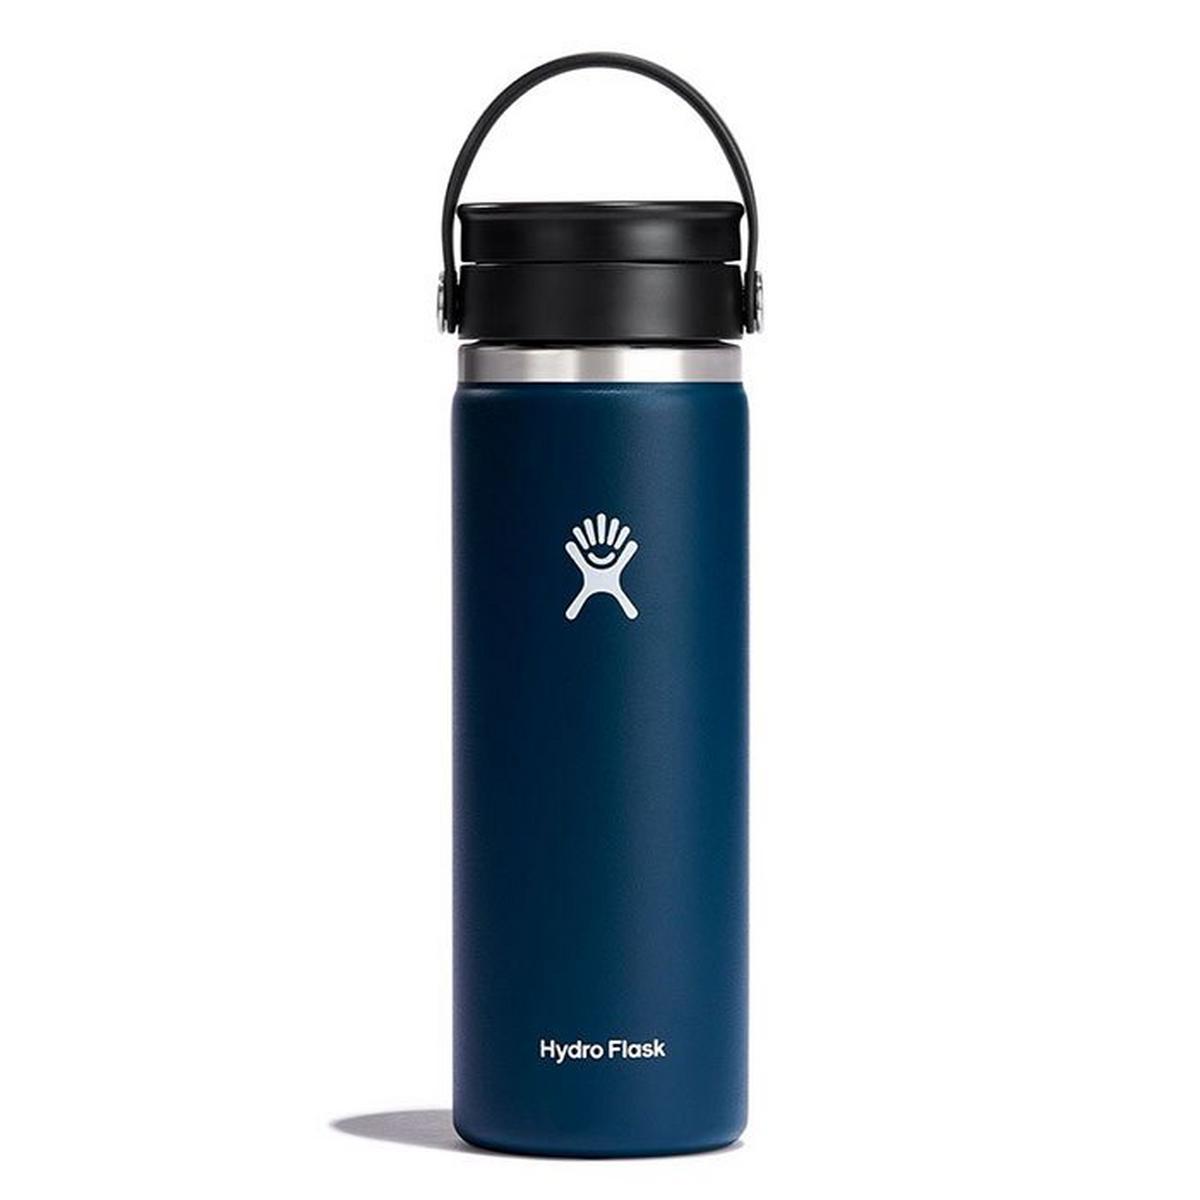 Coffee Insulated Bottle with Flex Sip™ Lid (20 oz)